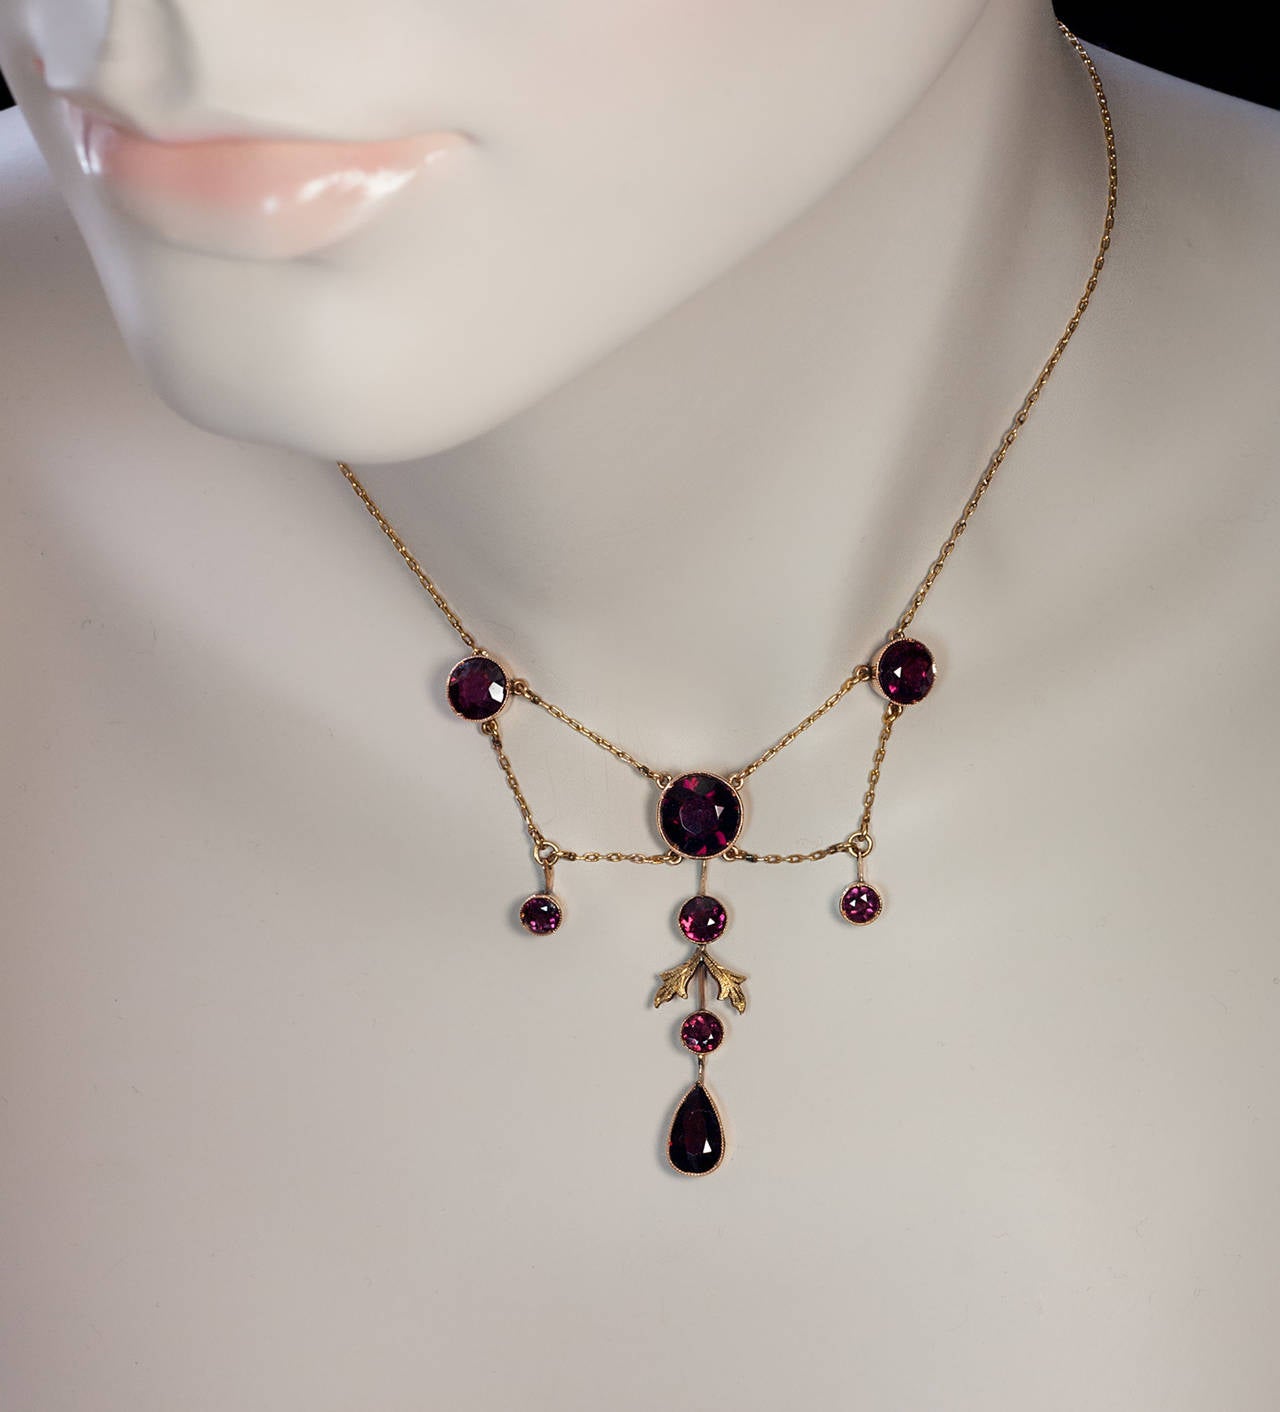 Edwardian era 14K gold and almandine garnet necklace

Russian, made in Odessa between 1908 and 1917

Marked with 56 zolotnik standard and maker's initials